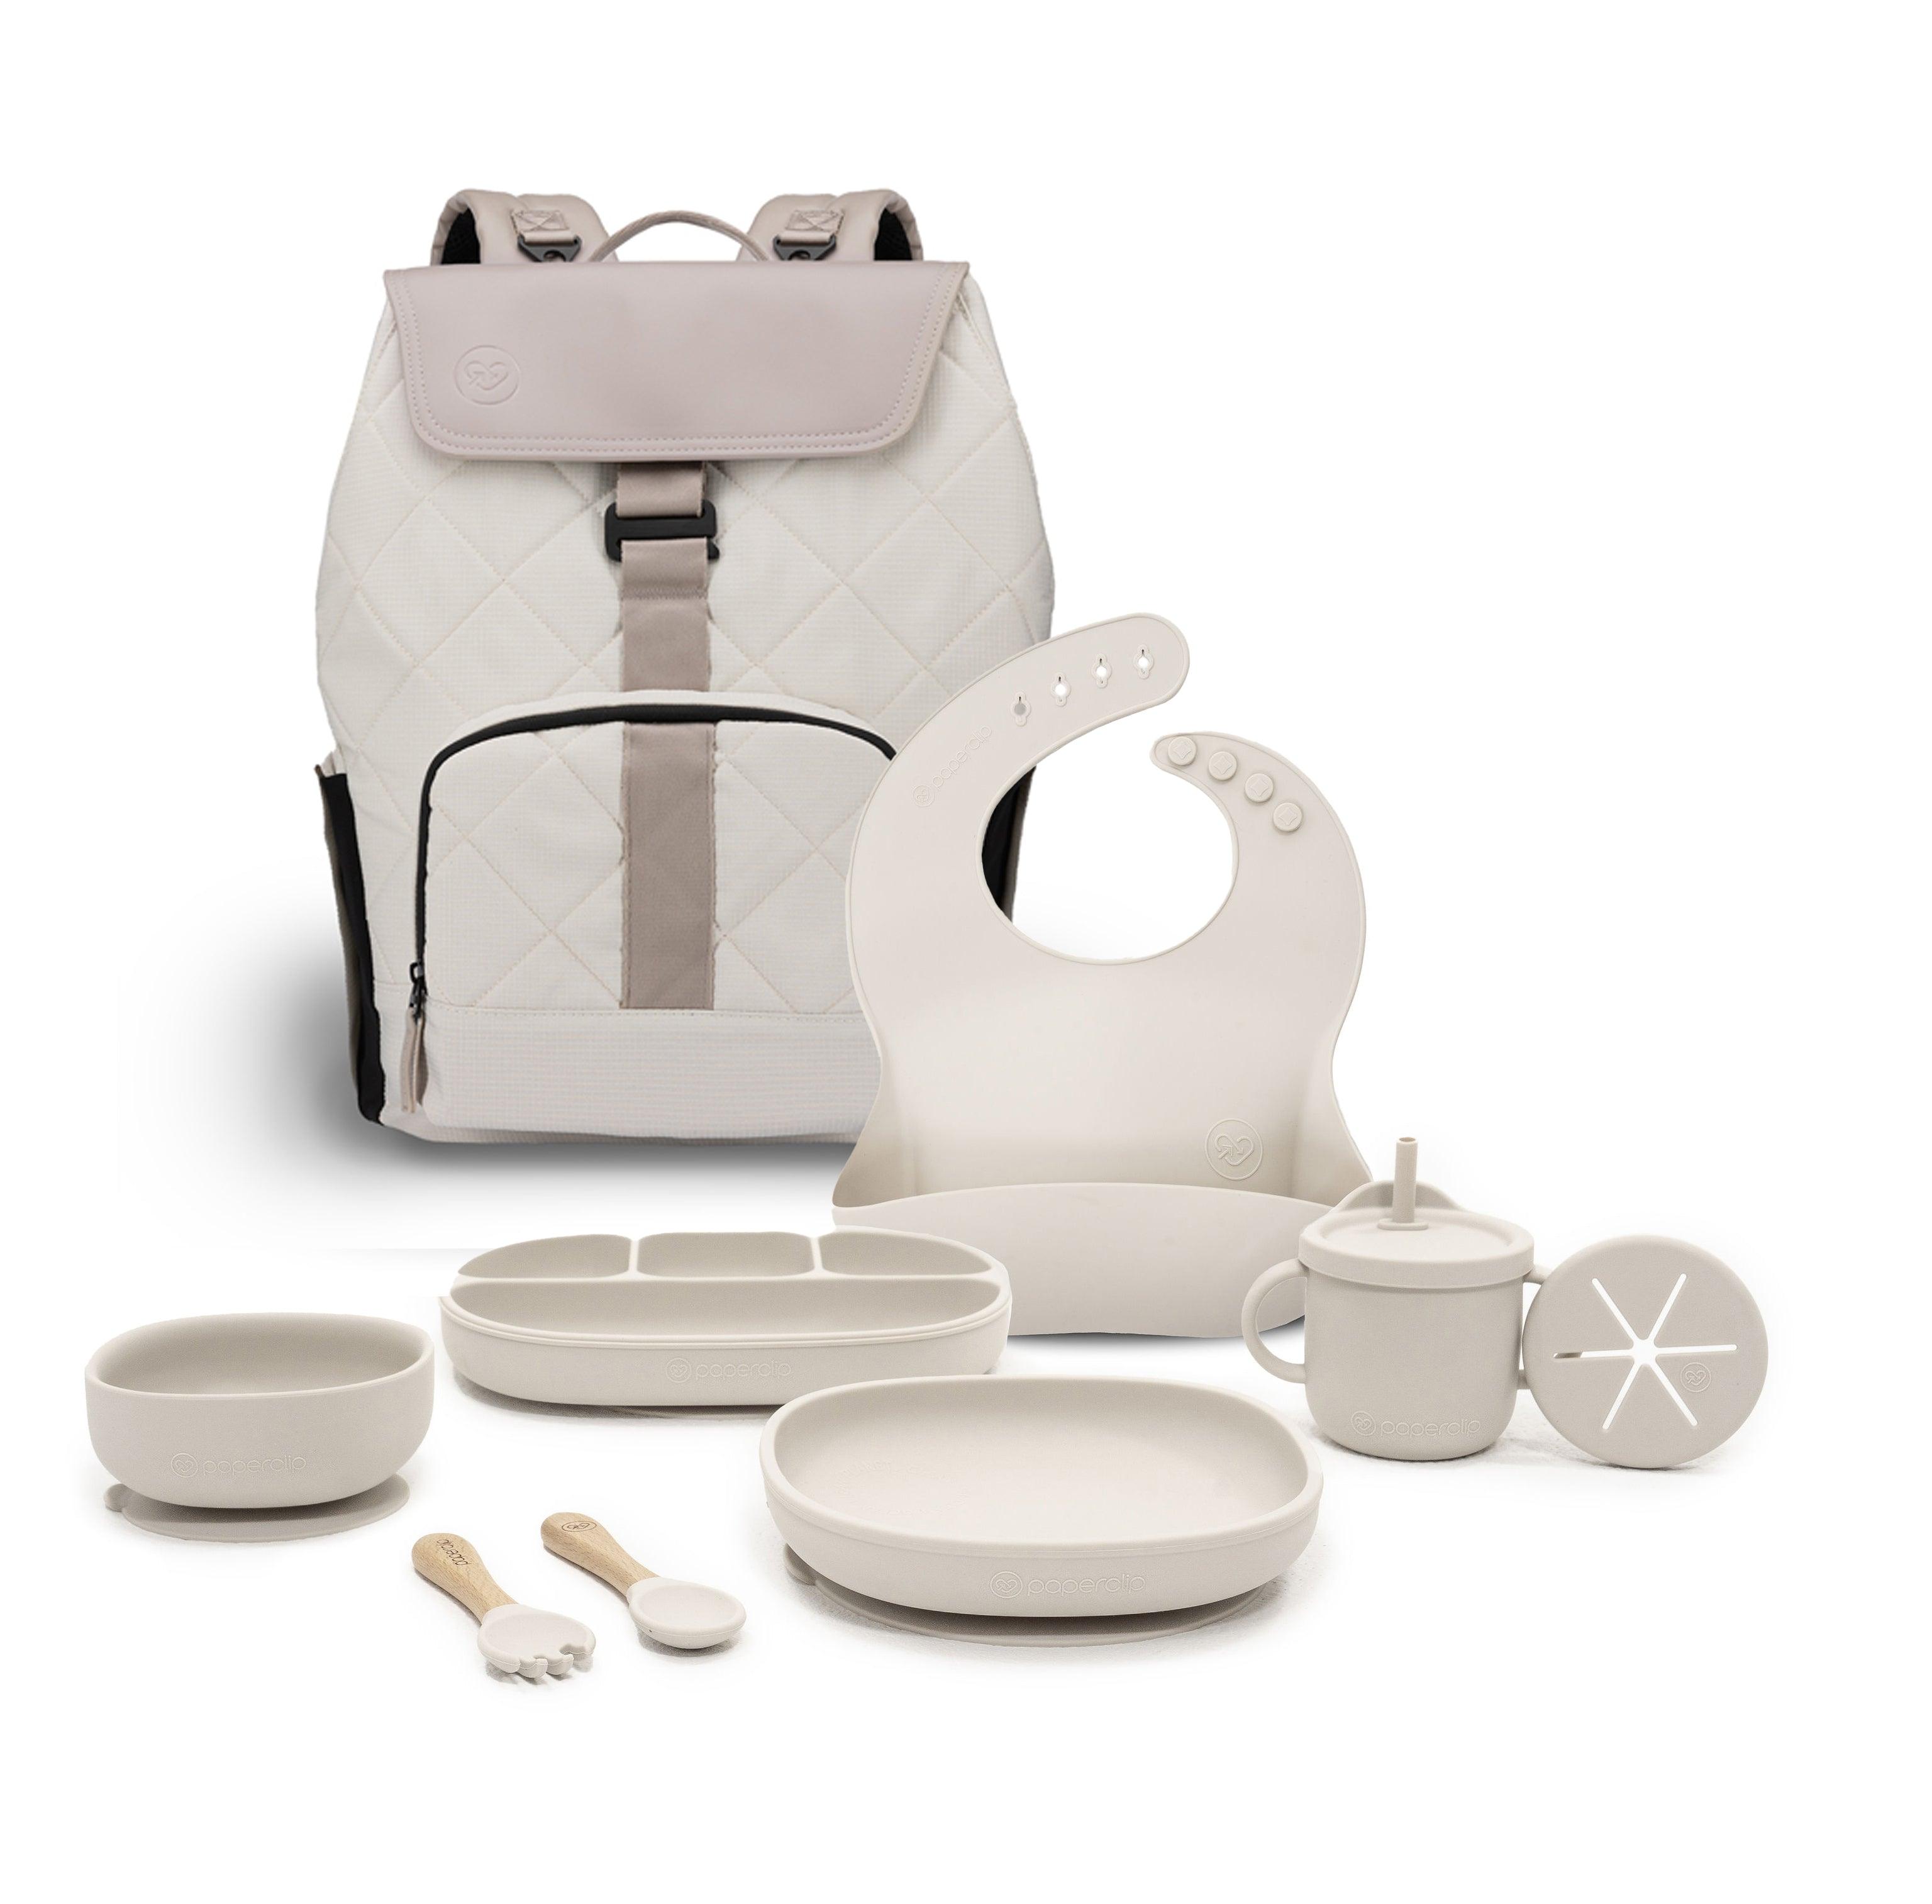 Check out Paperclip Bundles Featuring Diaper Bags and Feeding Items.